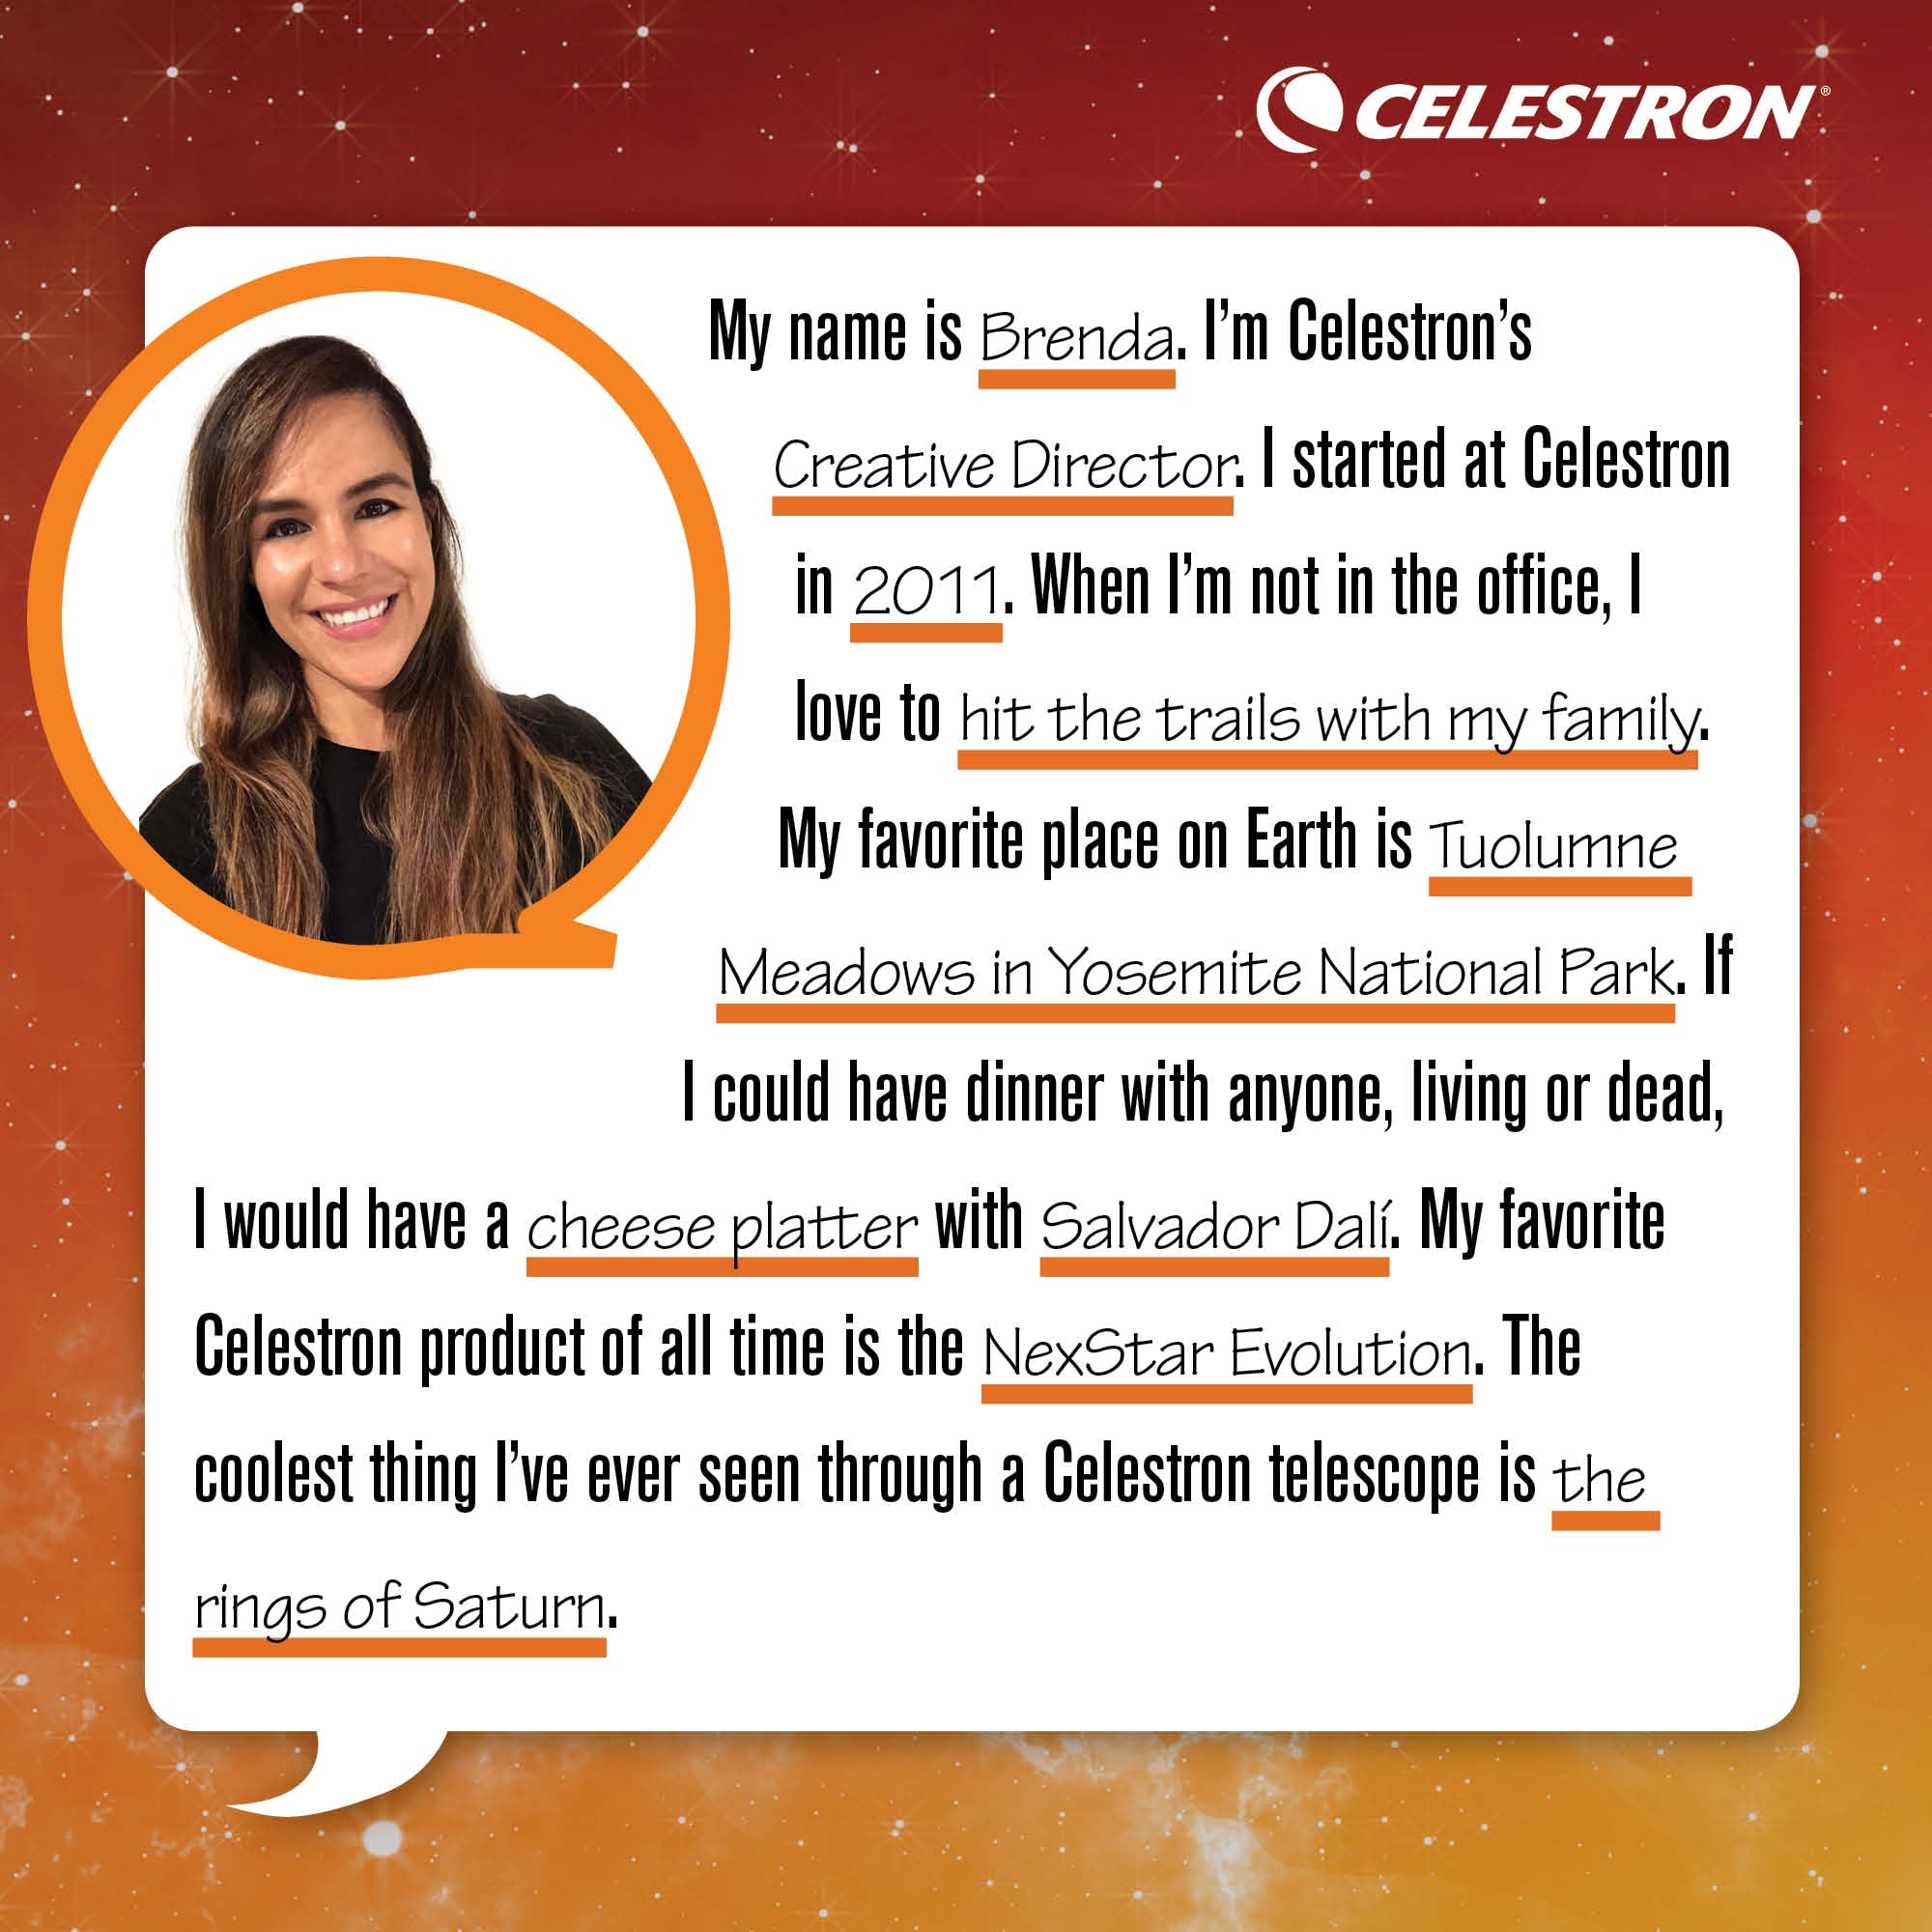 My name is Brenda. I'm Celestron's Creative Director. I started at Celestron in 2011. When I'm not in the office, I love to hit the trails with my family.  My favorite place on Earth is Tuolumne Meadows in Yosemite National Park. If I could have dinner with anyone, living or dead, I would have cheese platter with Salvador Dali. My favorite Celestron product of all time is the NexStar Evolution. The coolest thing I've ever seen through a Celestron telescope is the rings of Saturn.